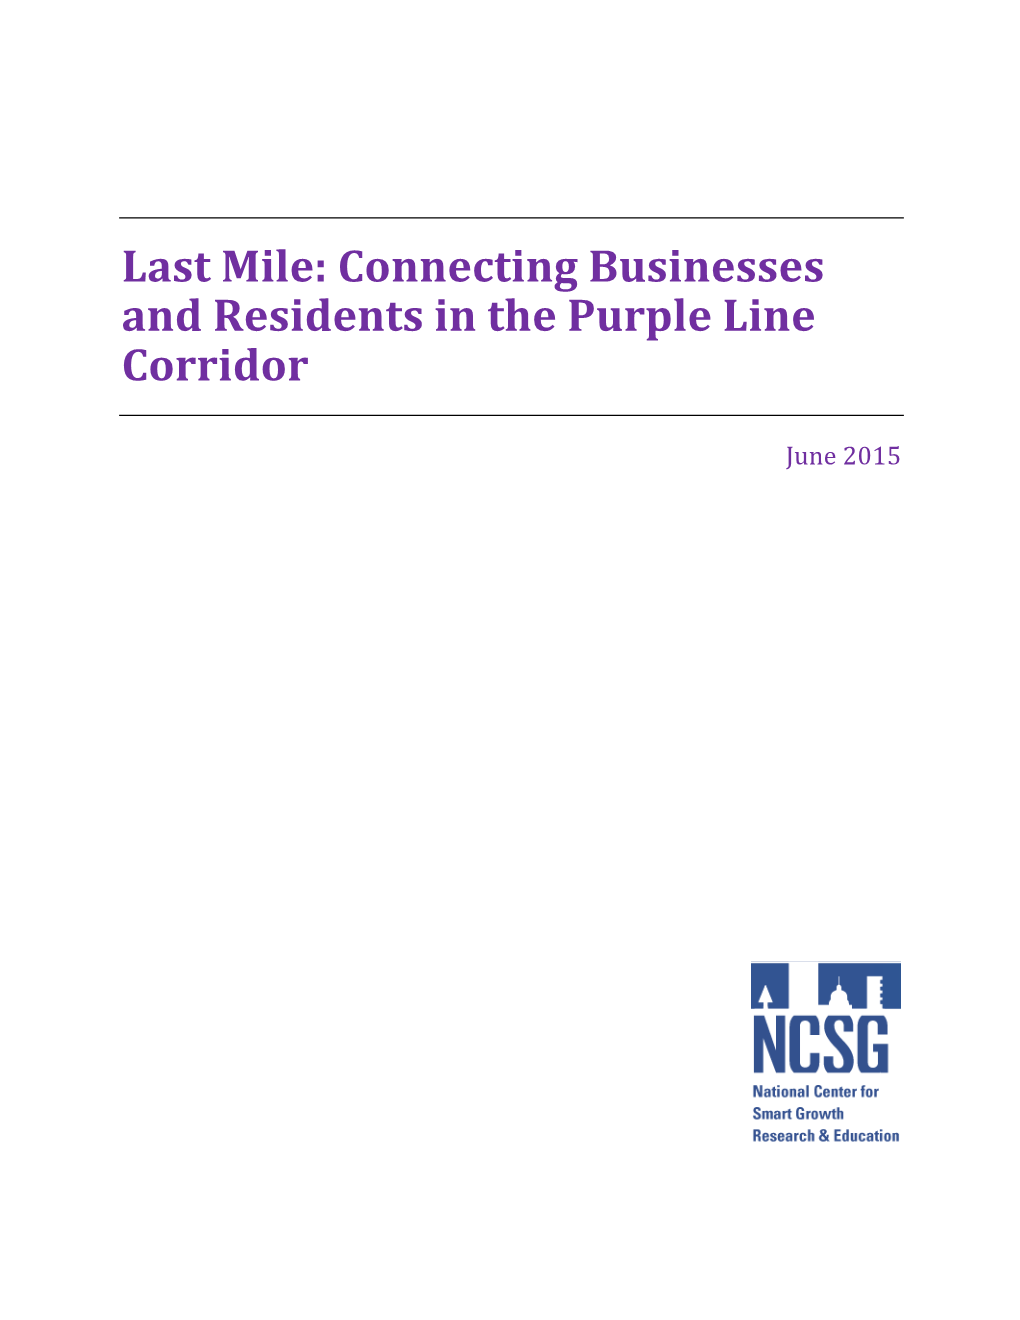 Last Mile: Connecting Businesses and Residents in the Purple Line Corridor